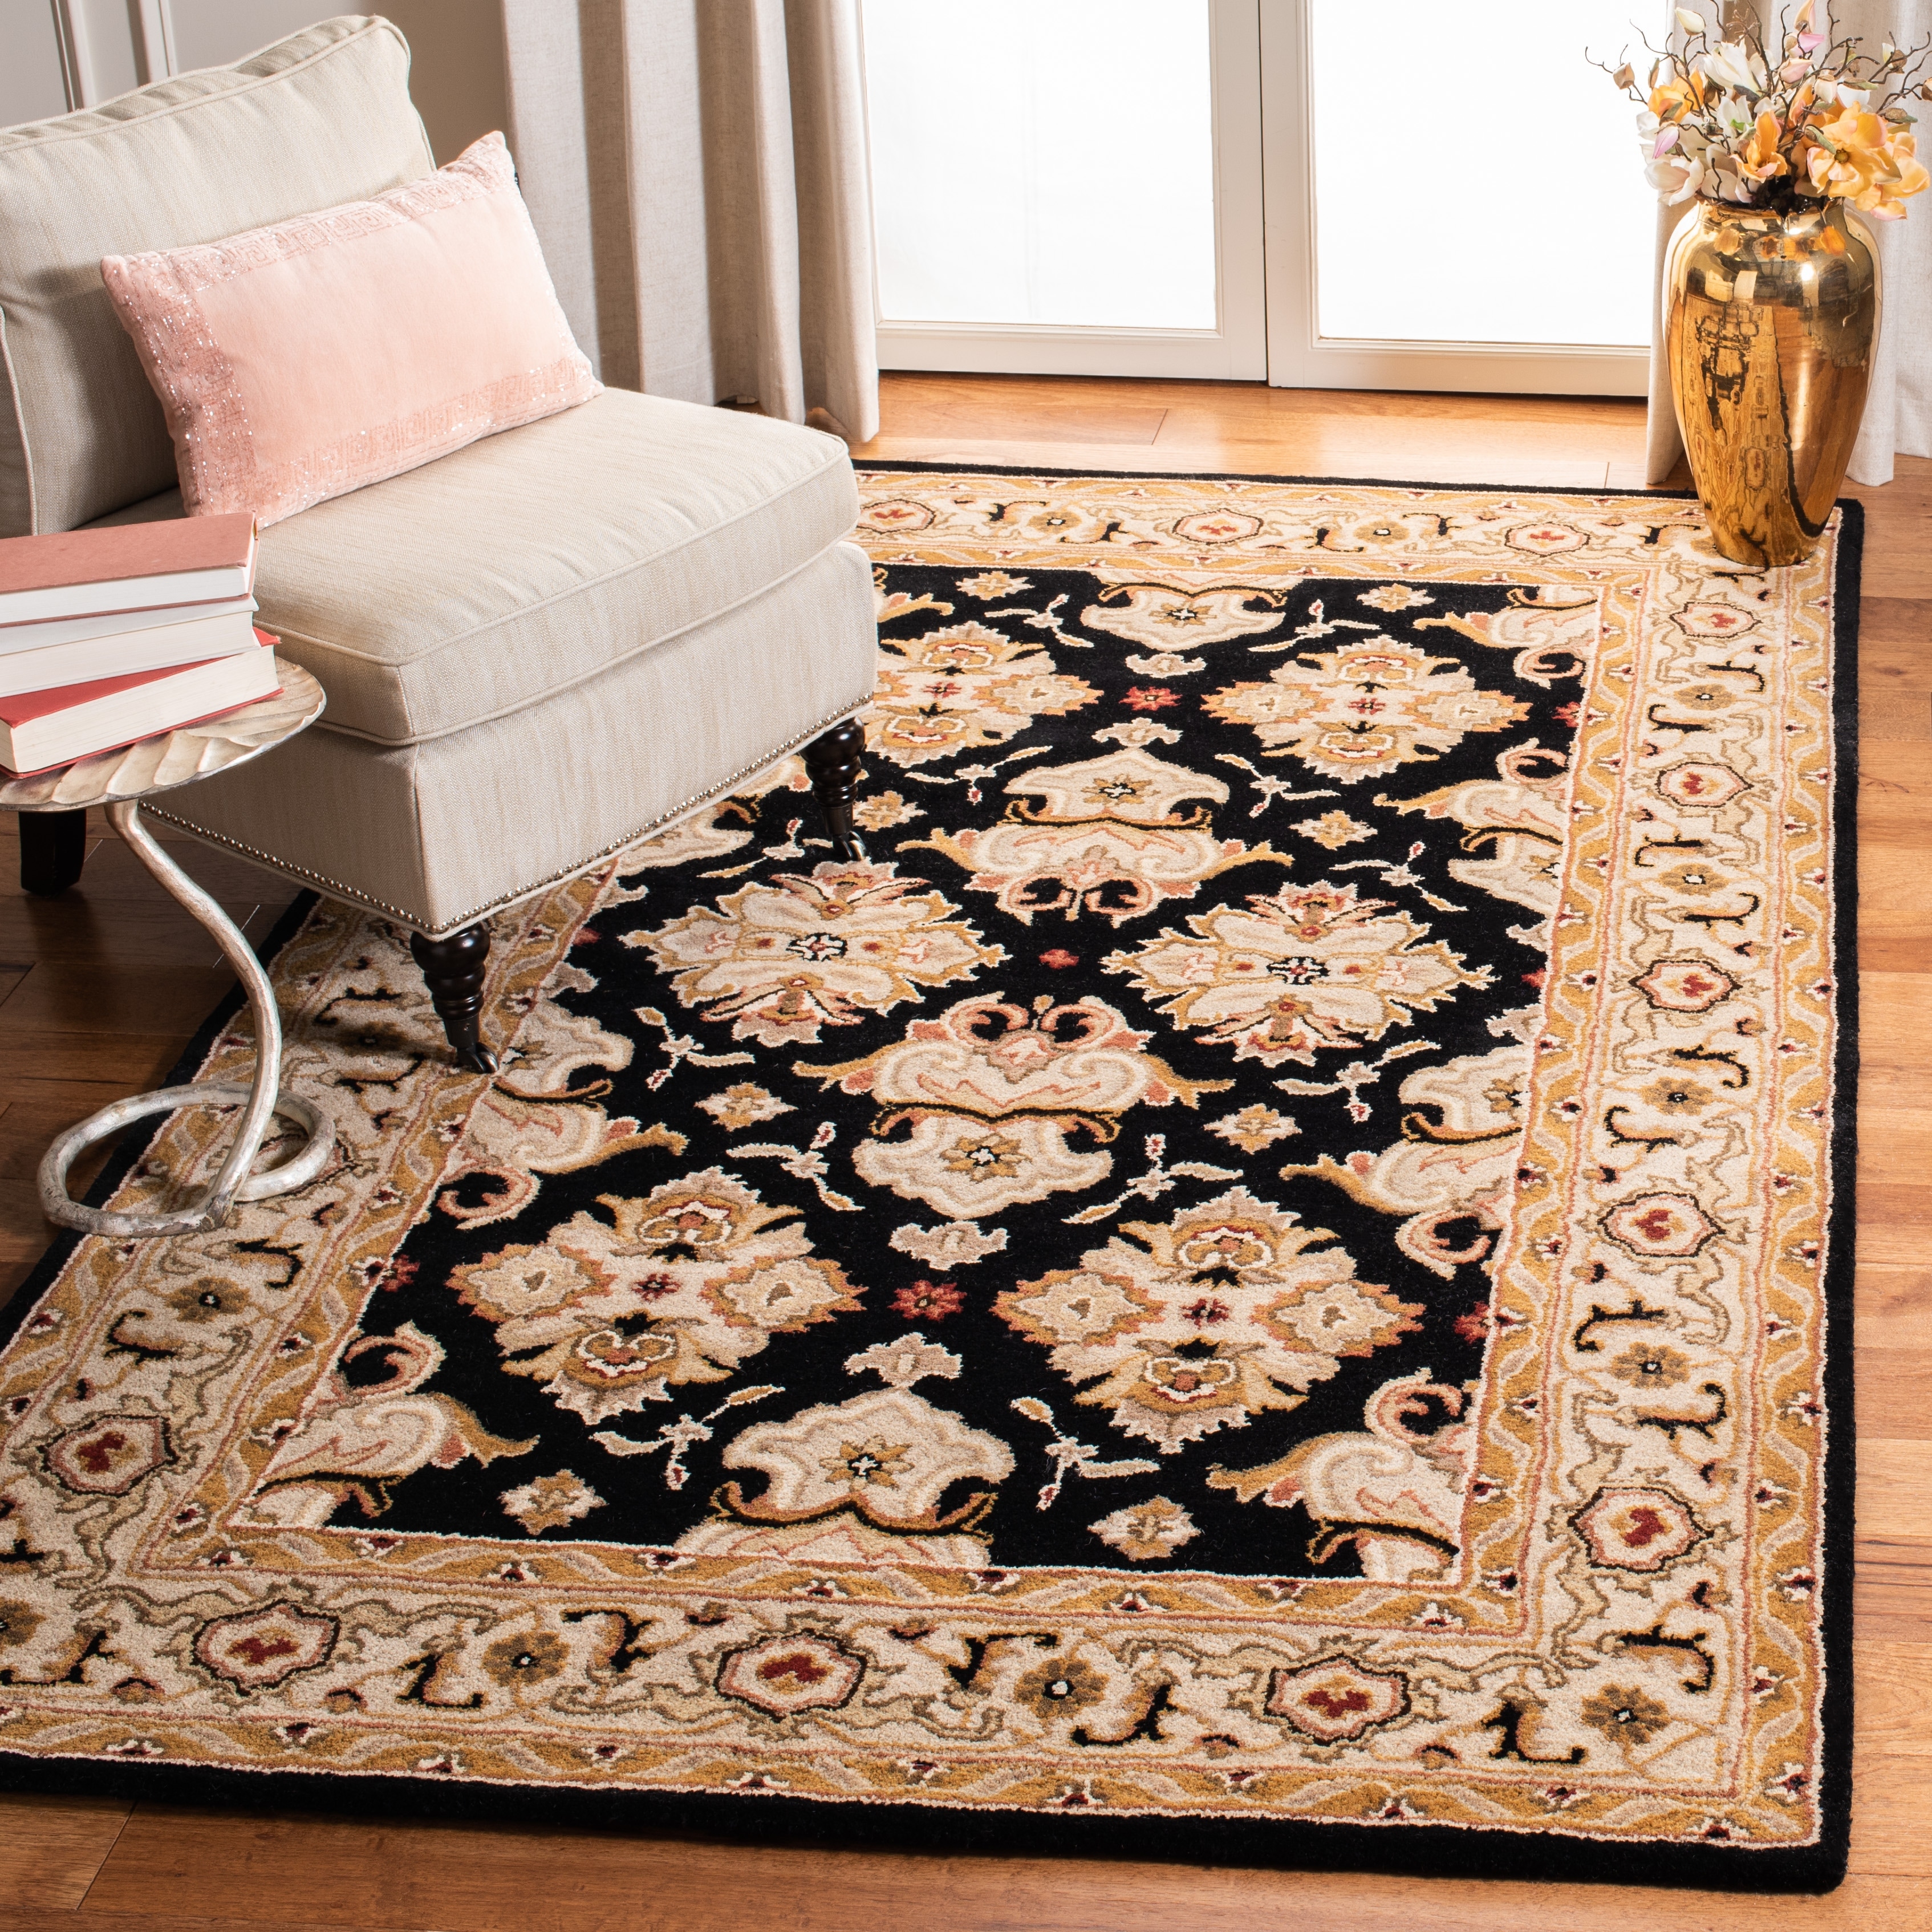 SAFAVIEH Anatolia Collection Area Rug - 8' x 10', Grey & Dark Grey,  Handmade Traditional Oriental Wool, Ideal for High Traffic Areas in Living  Room